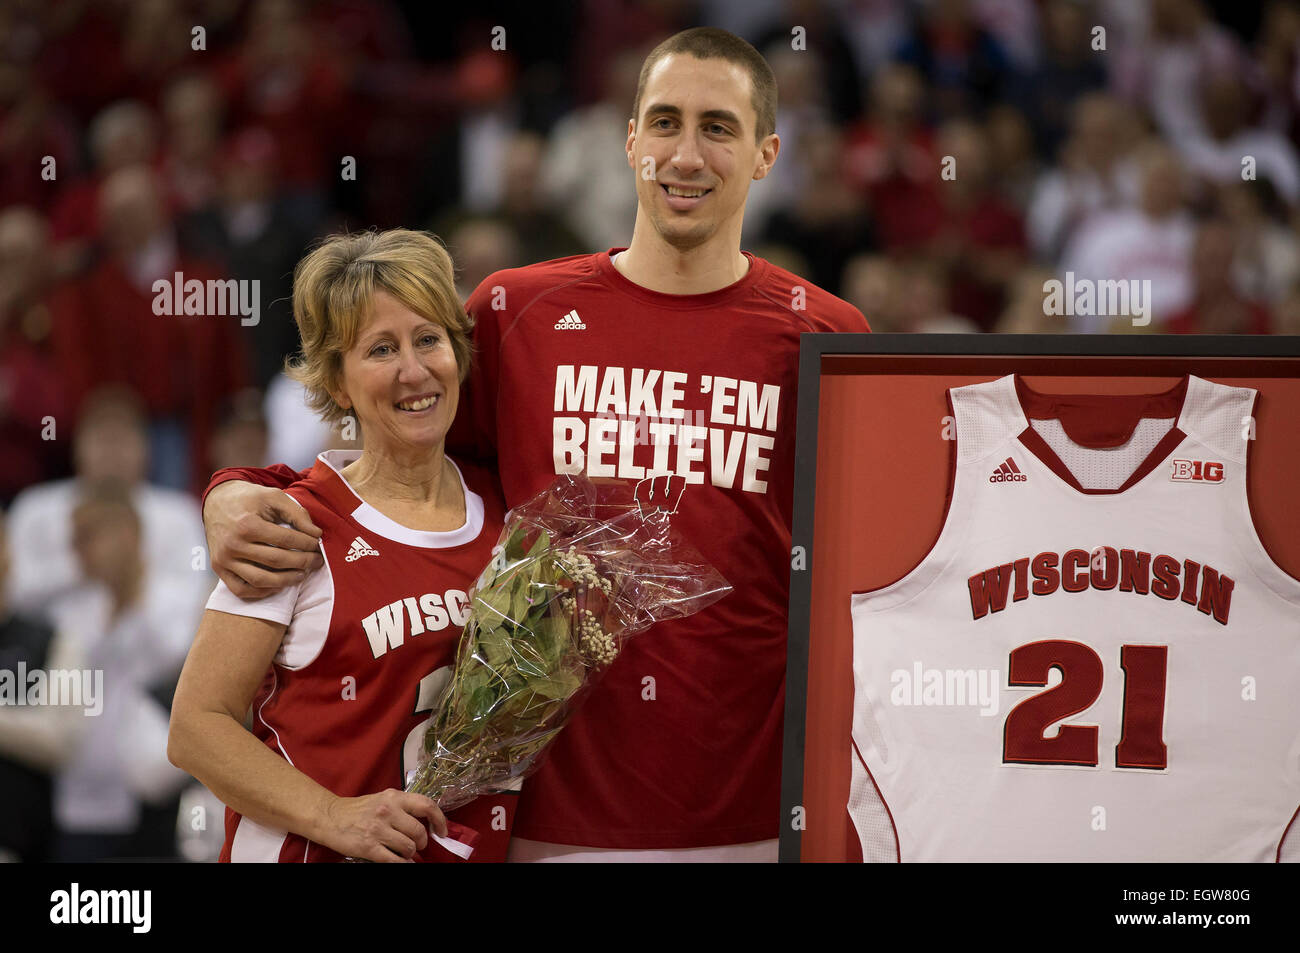 March 1, 2015: Wisconsin Badgers guard Josh Gasser #21 poses for a picture on Senior Day prior to the NCAA Basketball game between the Wisconsin Badgers and Michigan State Spartans at the Kohl Center in Madison, WI. Wisconsin defeated Michigan State 68-61. John Fisher/CSM Stock Photo